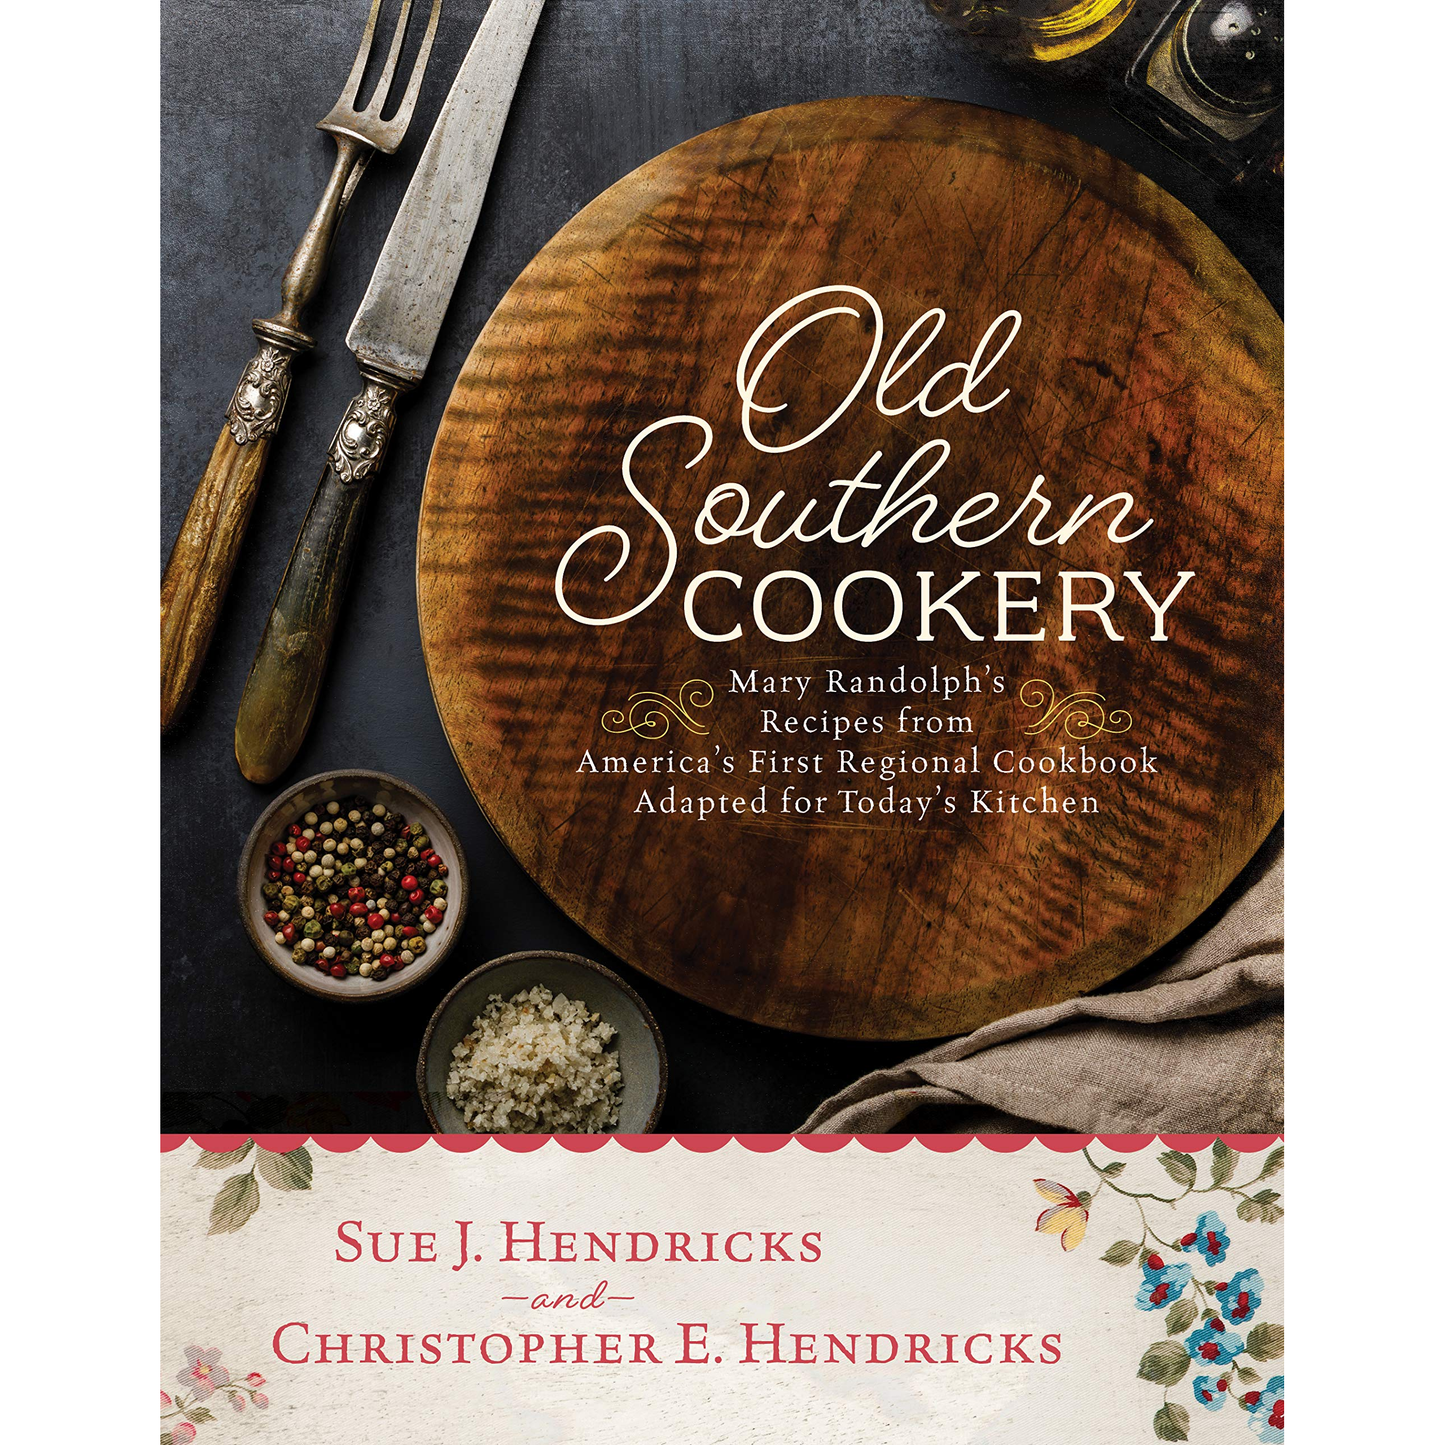 Old Southern Cookery by Sue J. Hendricks and Christopher E. Hendricks